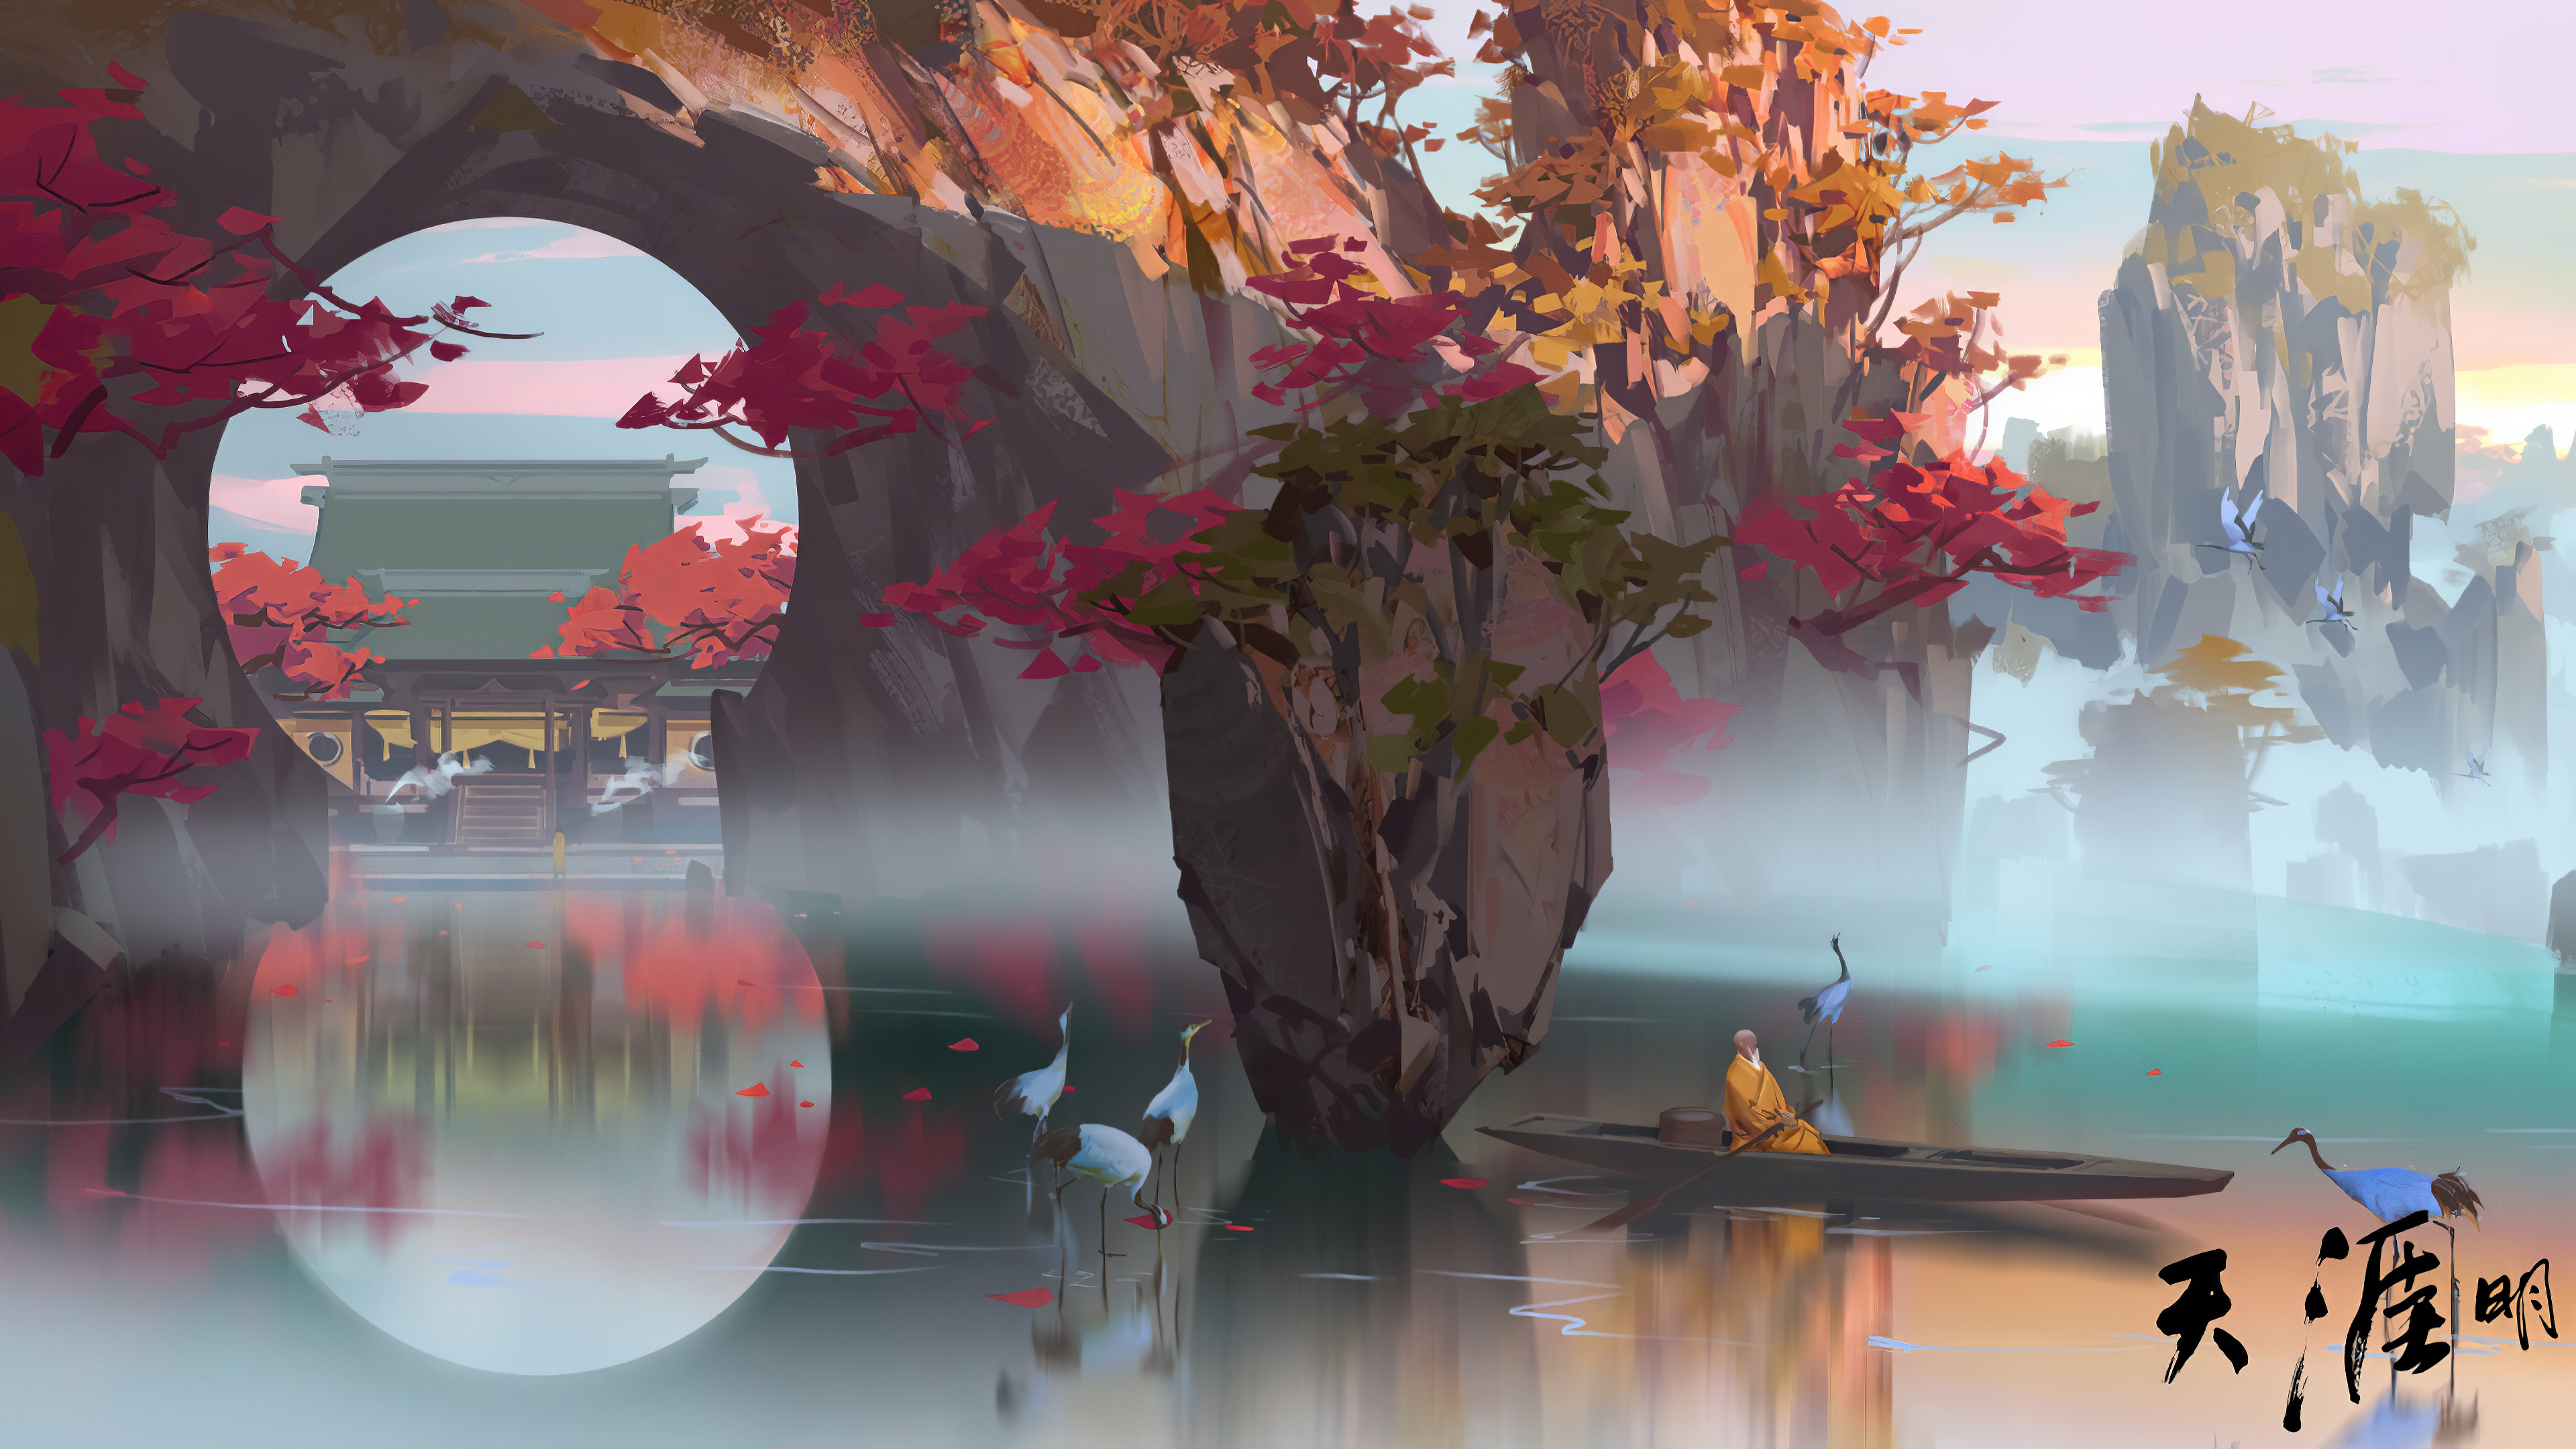 Shaolin Lake By G Liulian With Image Environment